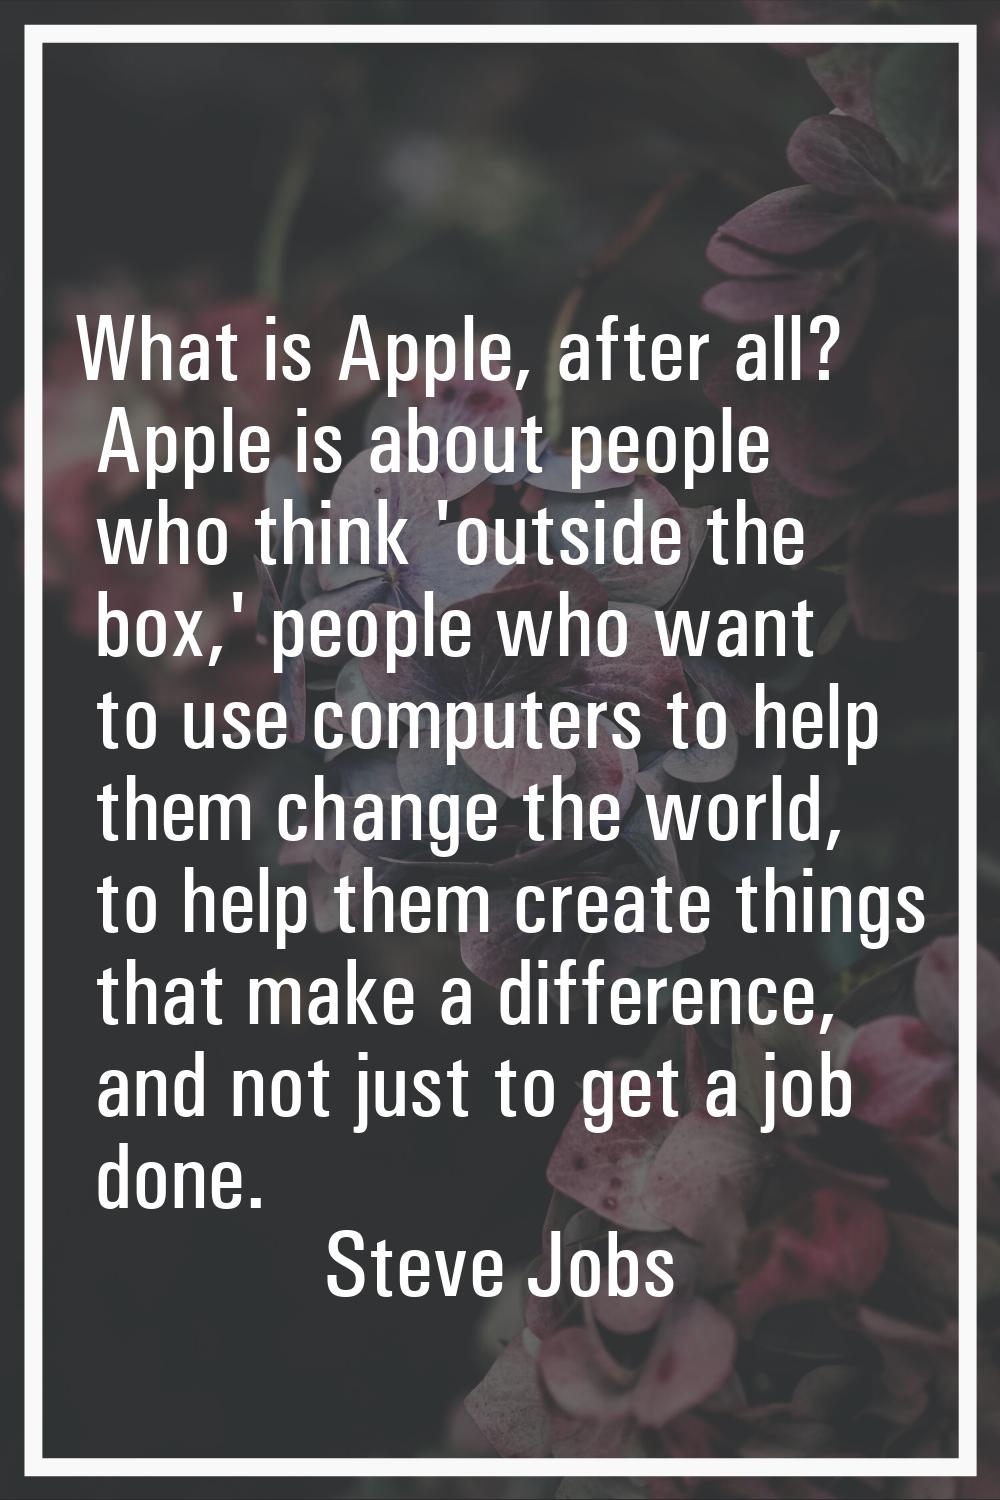 What is Apple, after all? Apple is about people who think 'outside the box,' people who want to use